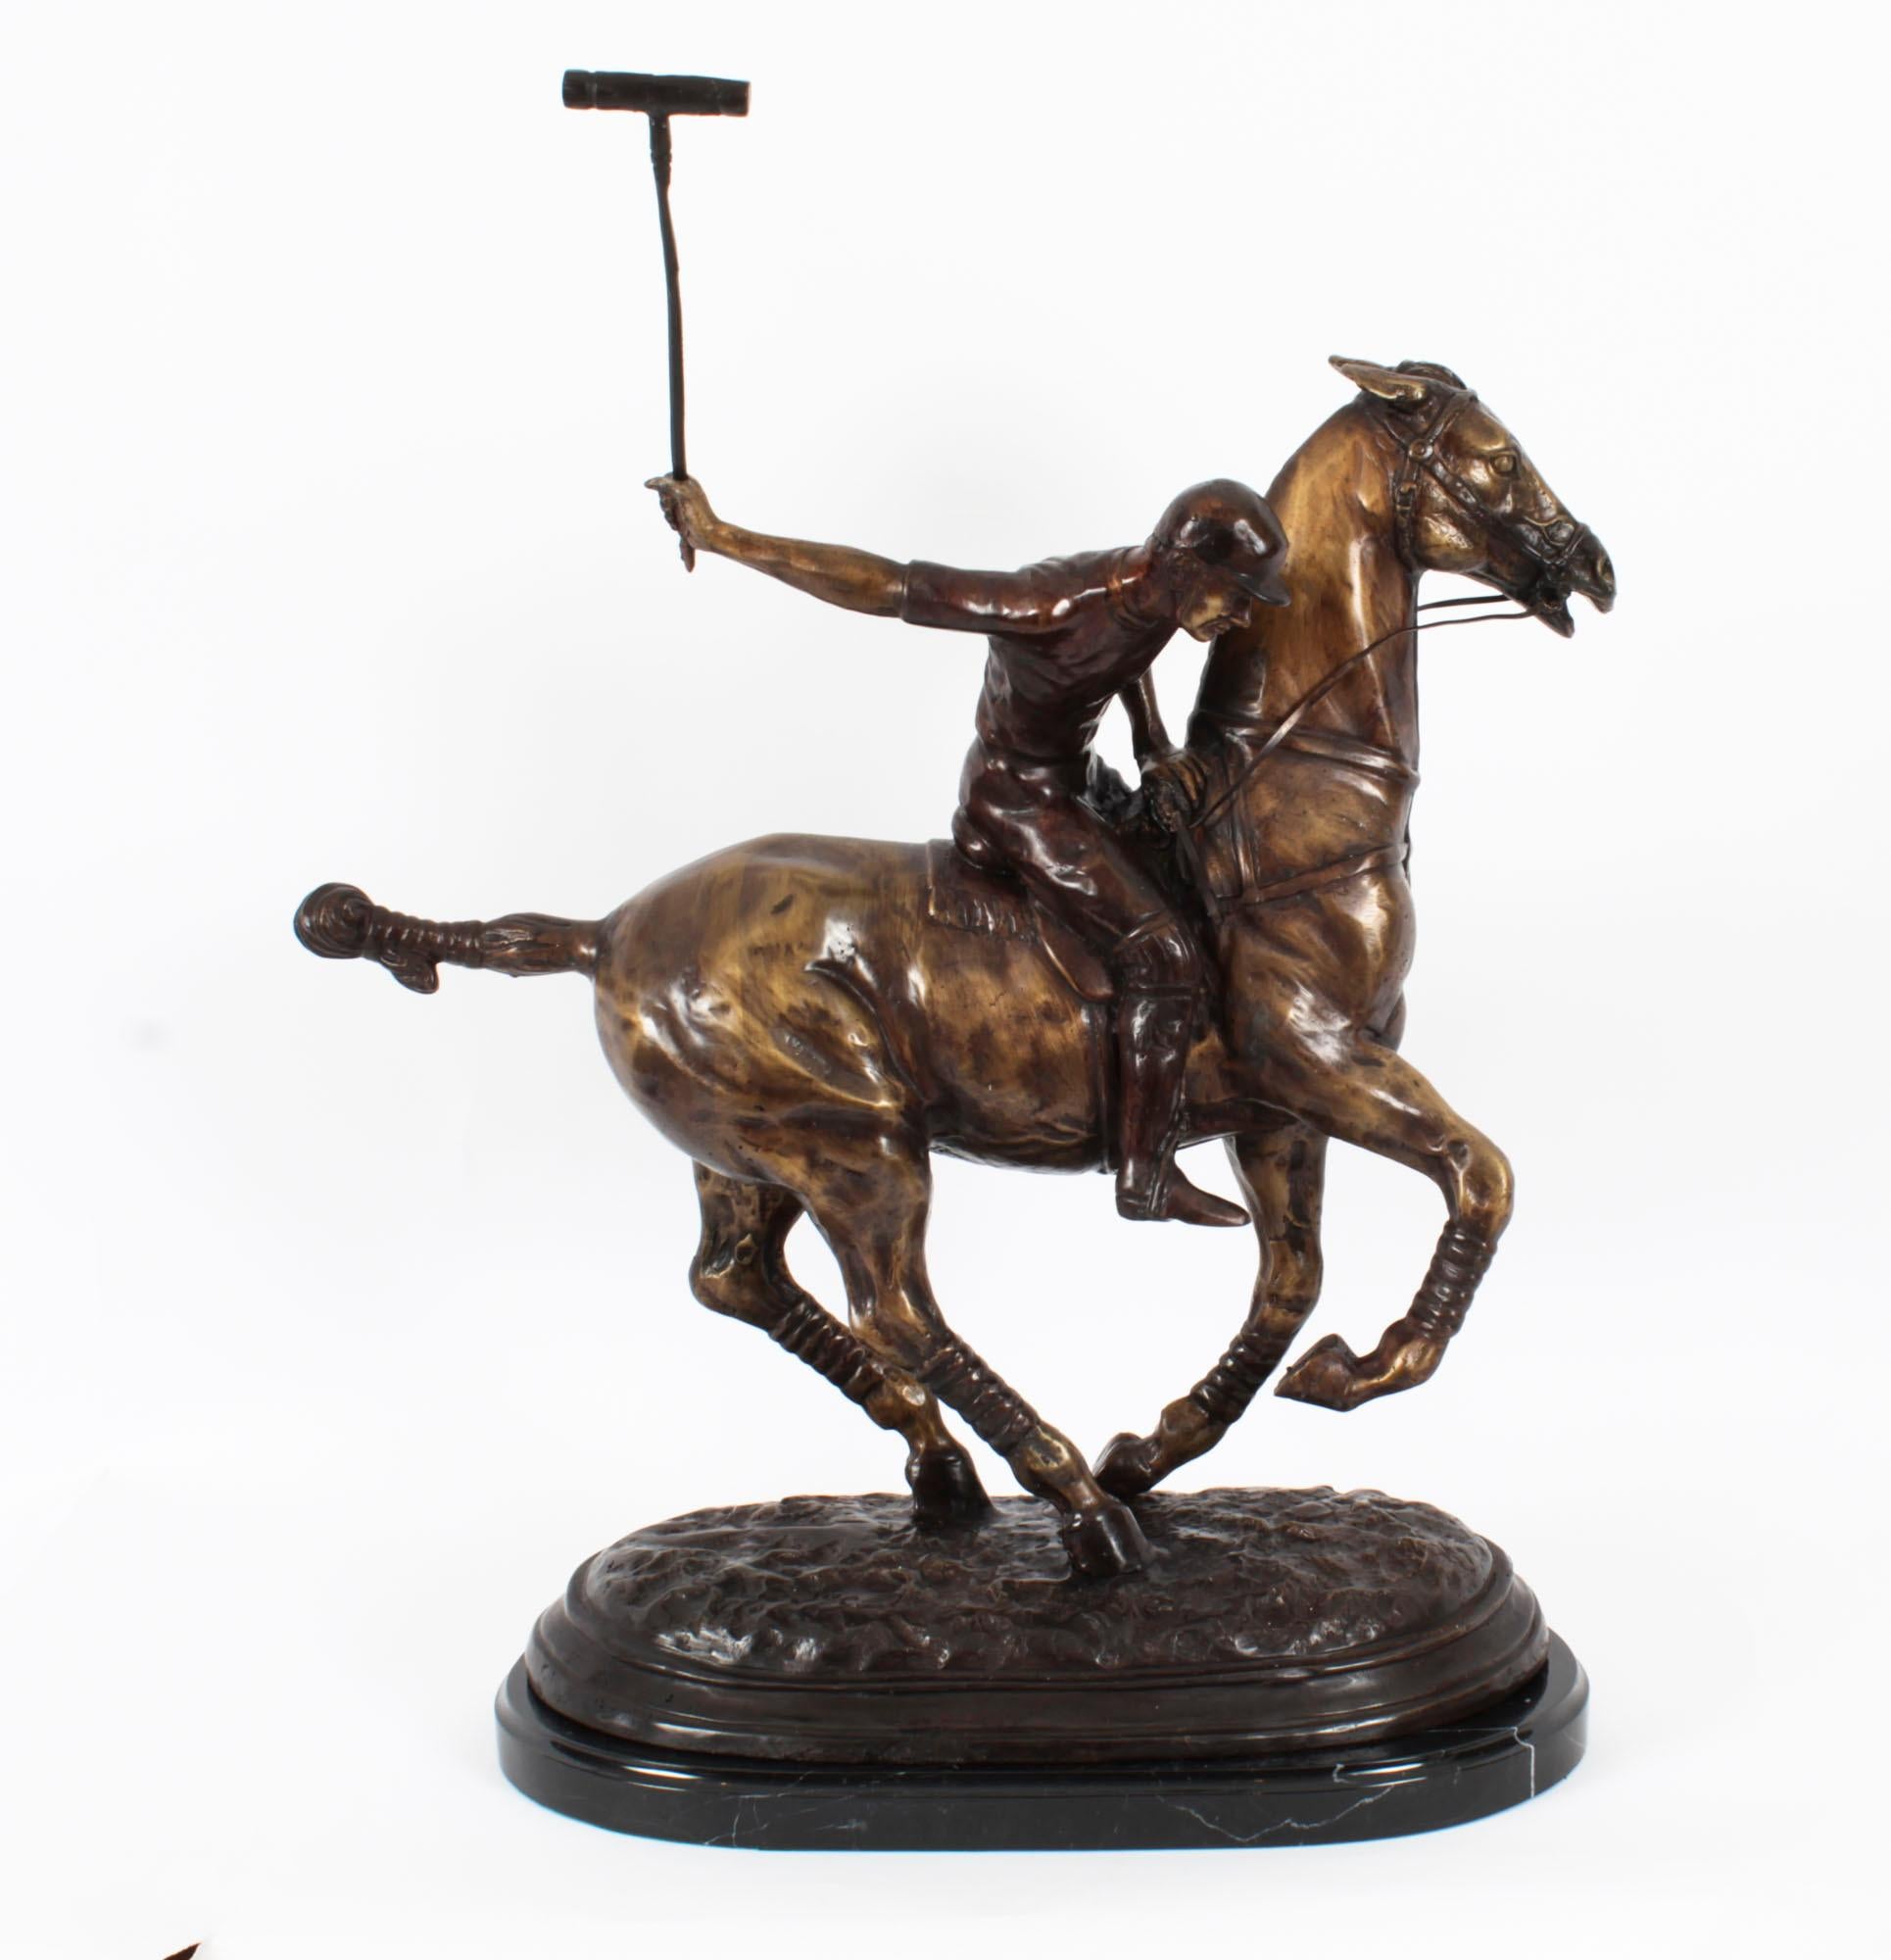 This is a handsome bronze sculpture of a polo player on his horse galloping towards the ball at high speed, dating from the last quarter of the 20th century.

Cast by the traditional lost wax process otherwise known as the cire perdue process.

The